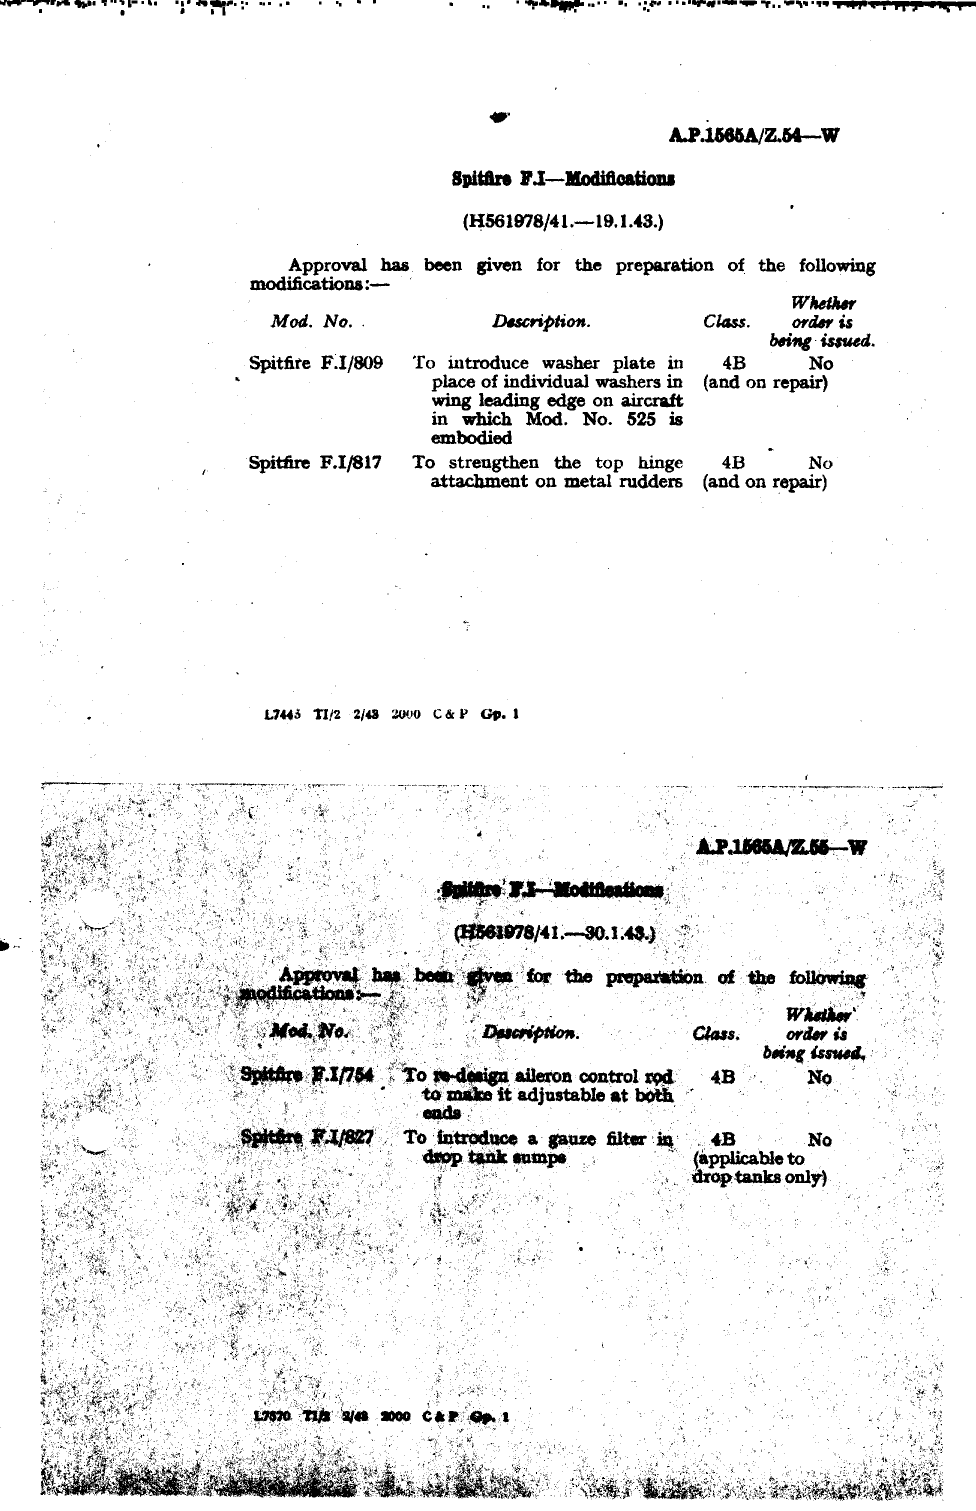 Sample page 1 from AirCorps Library document: Spitfire F.I Modifications 809 and 817